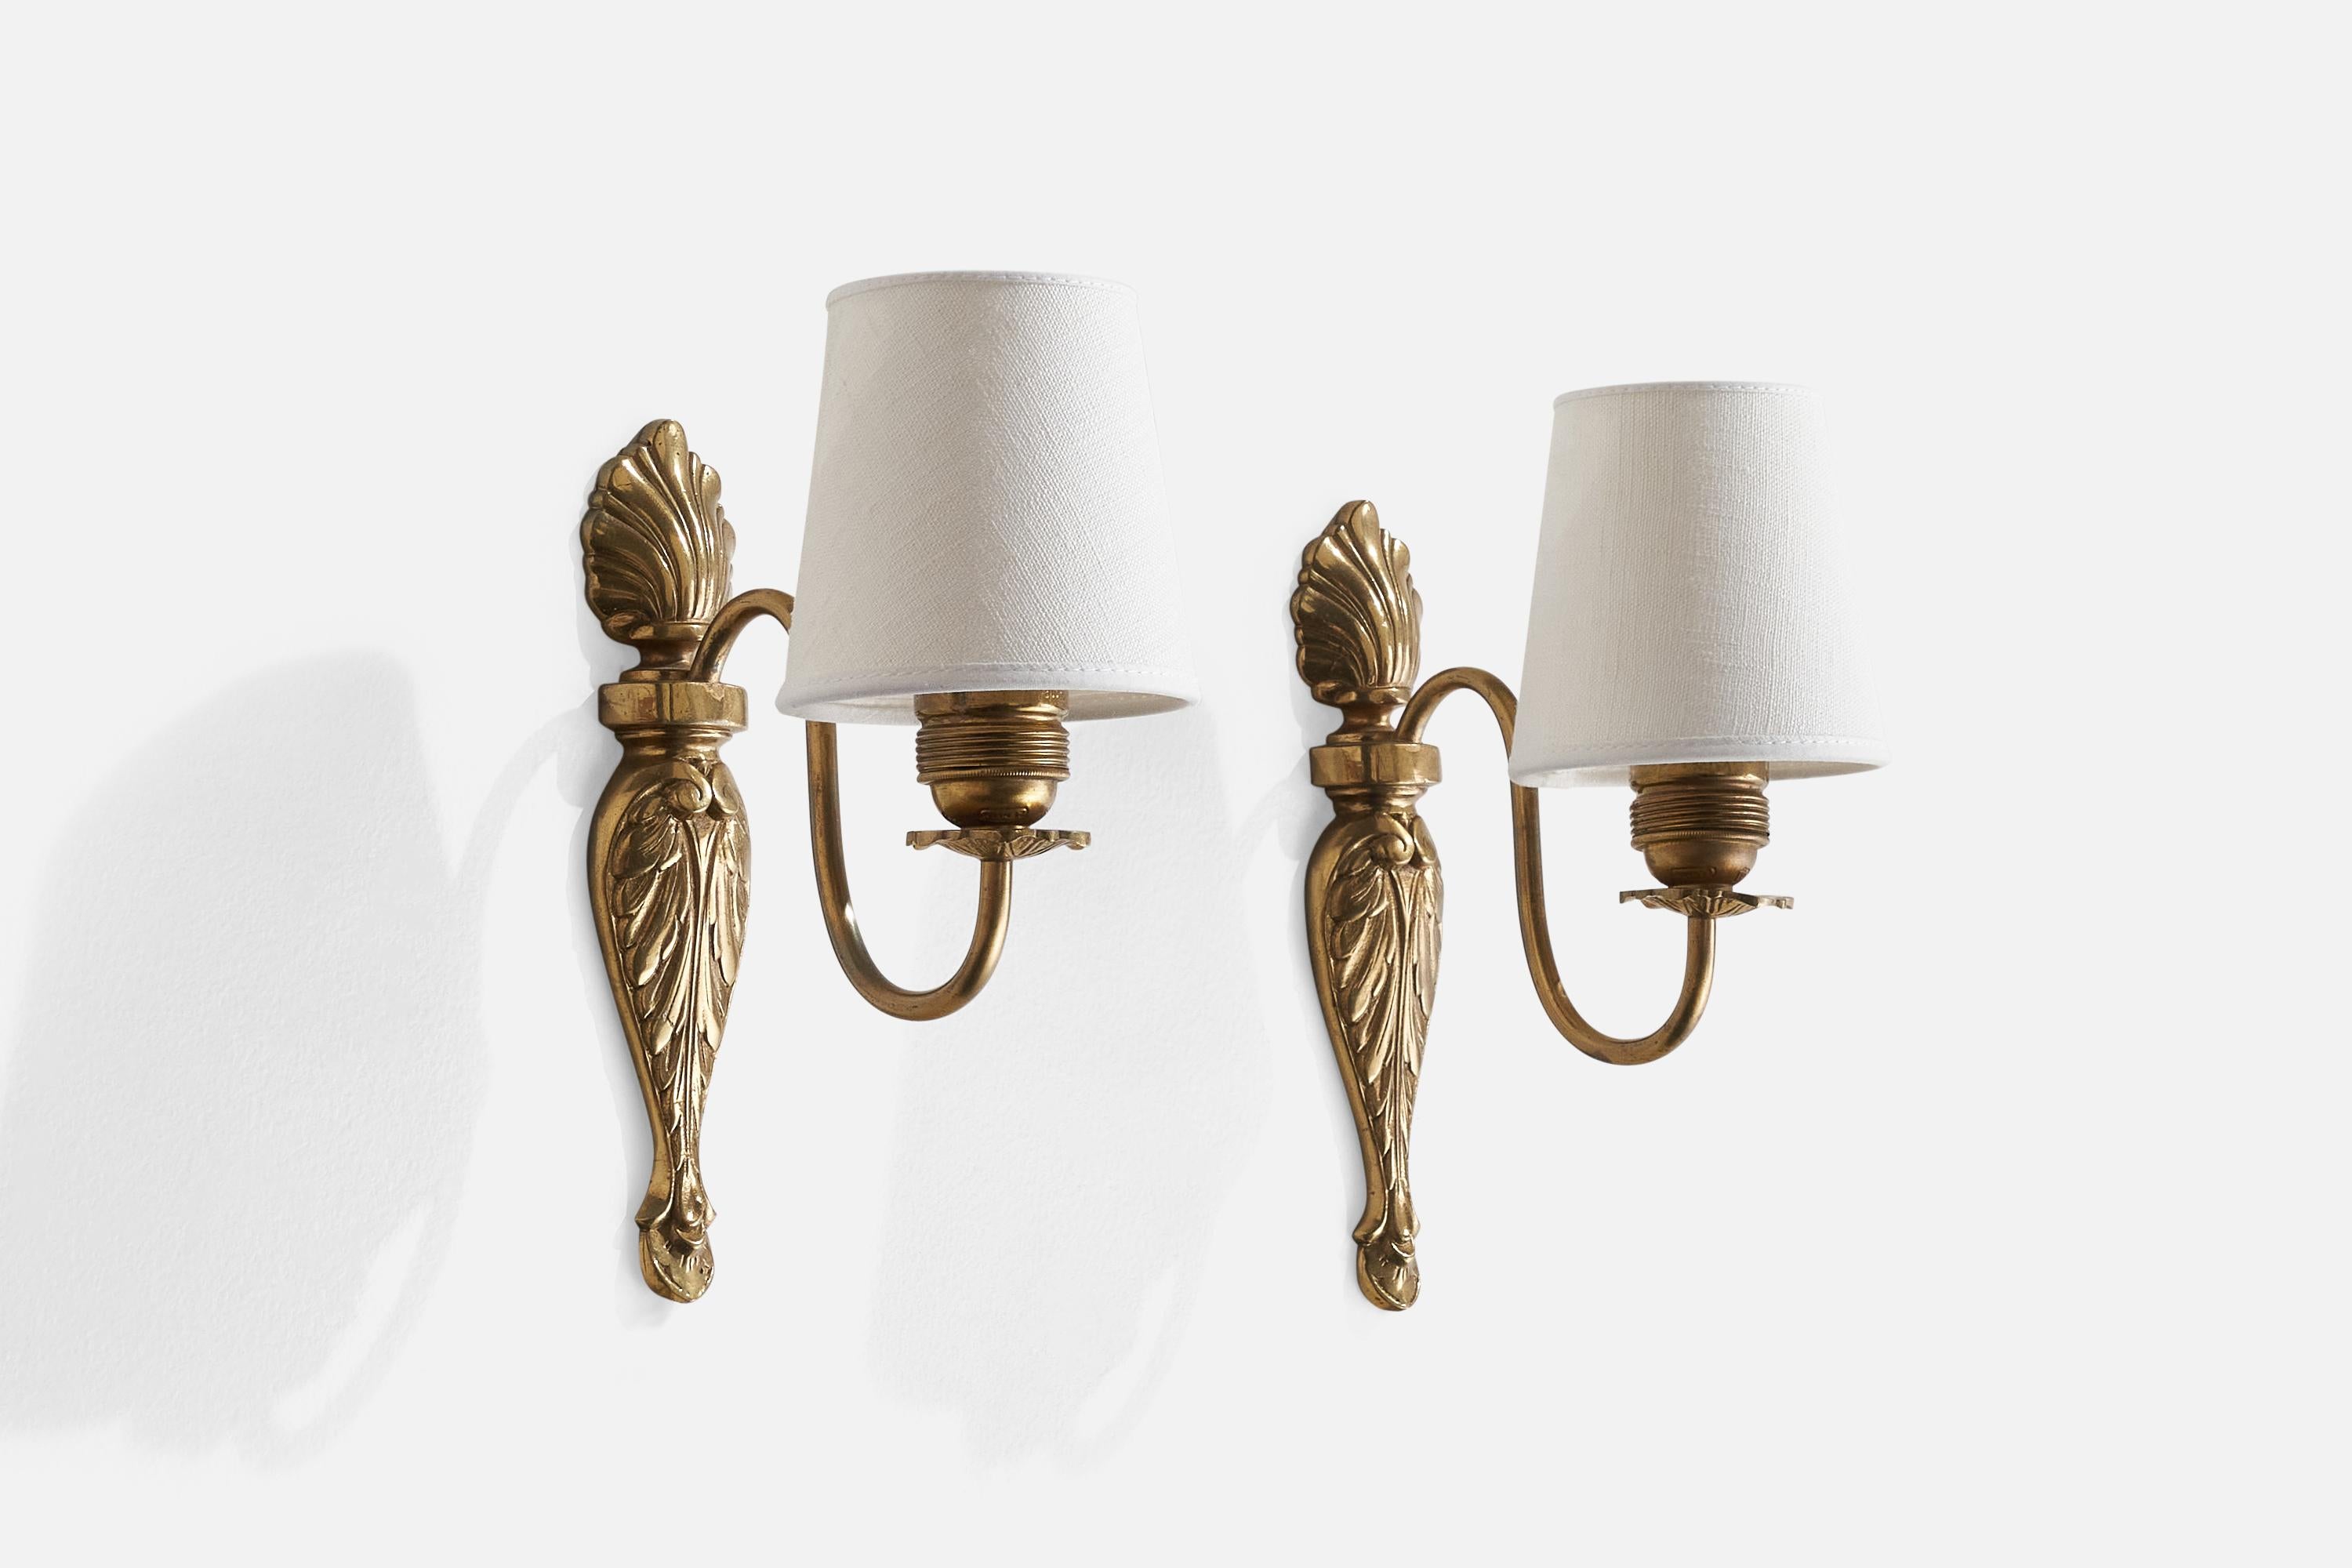 A pair of brass and white fabric wall light designed and produced in Sweden, c. 1930s.

Overall Dimensions (inches): 9” H x 4” W x 6.5 D
Back Plate Dimensions (inches): n/a
Bulb Specifications: E-26 Bulb
Number of Sockets: 2
All lighting will be